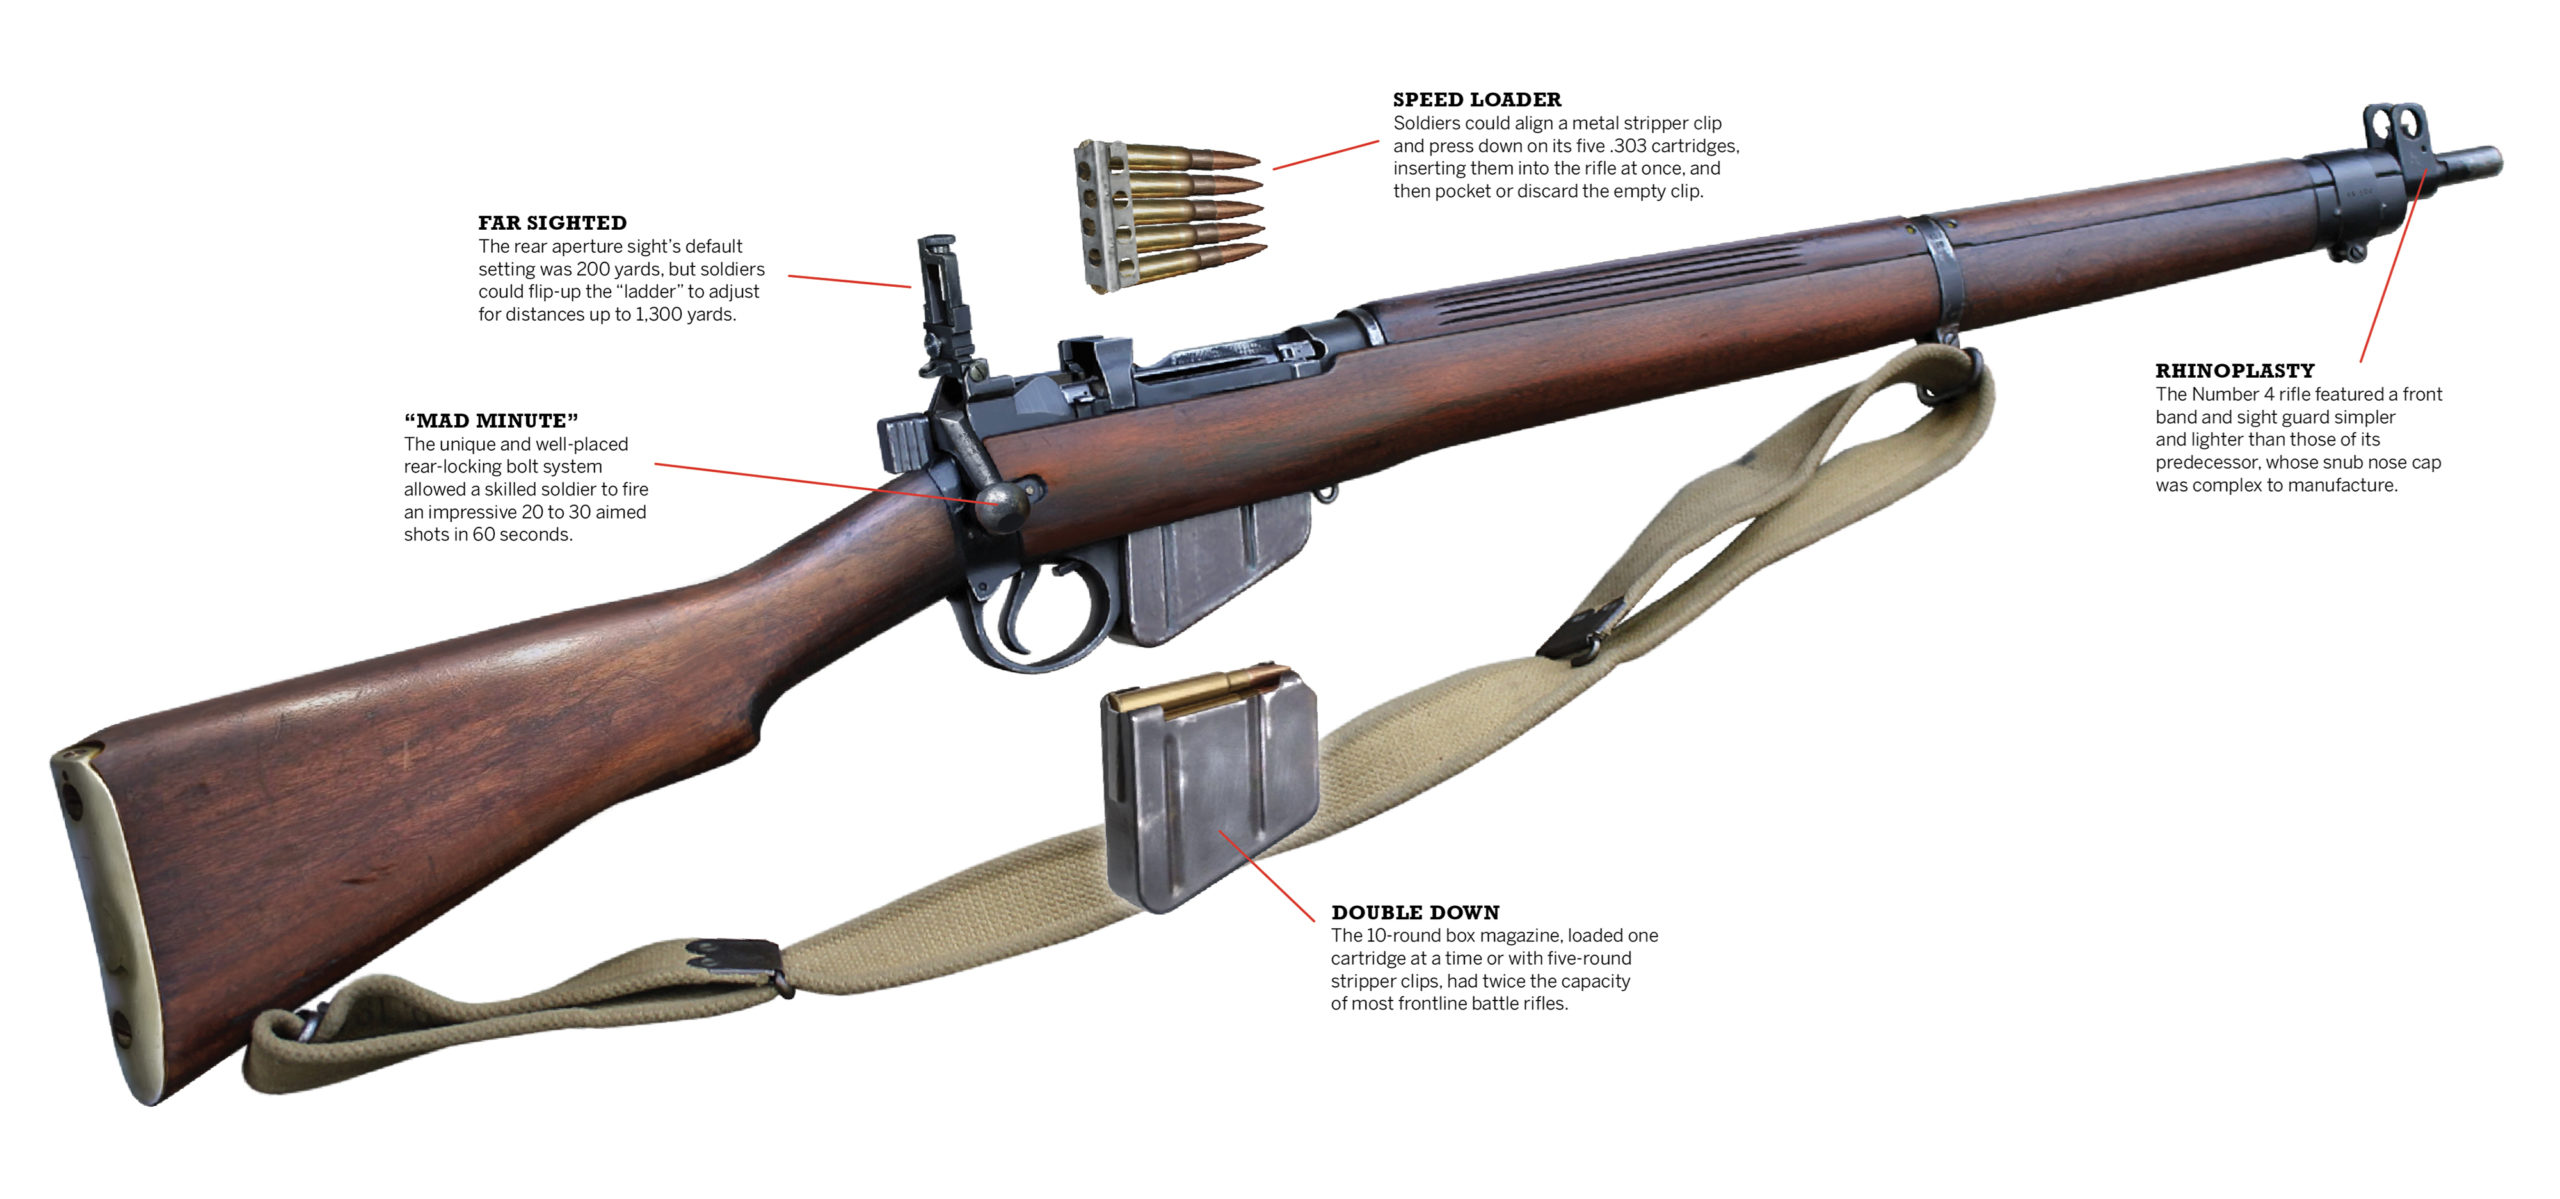 The Lee-Enfield Put a SMLE on Tommies' Faces and Fear in the Germans Hearts